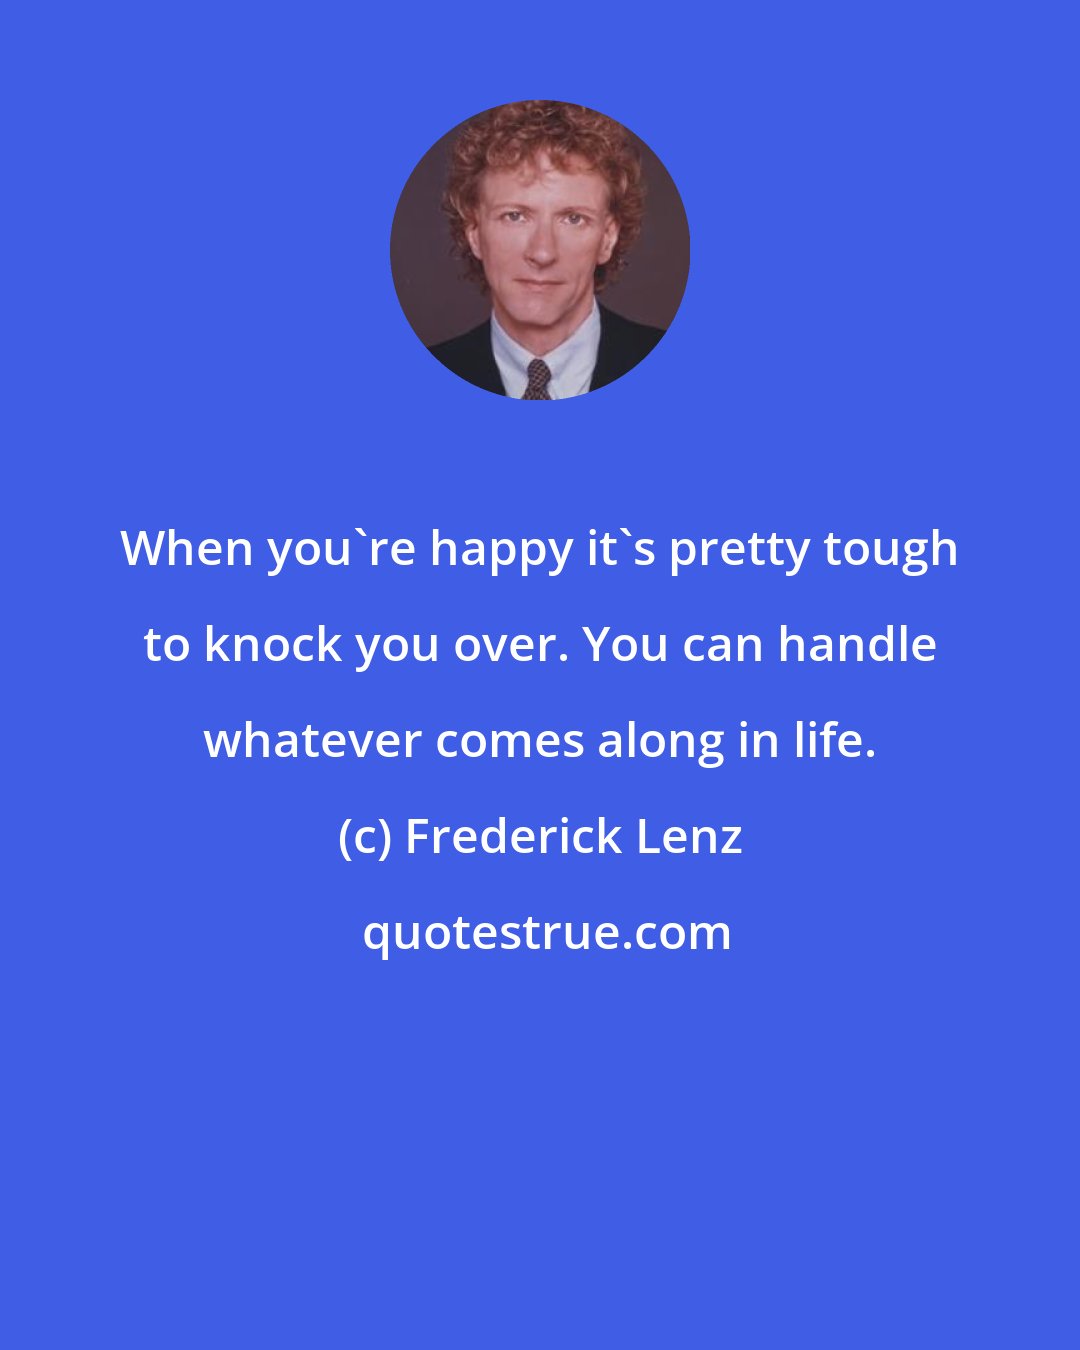 Frederick Lenz: When you're happy it's pretty tough to knock you over. You can handle whatever comes along in life.